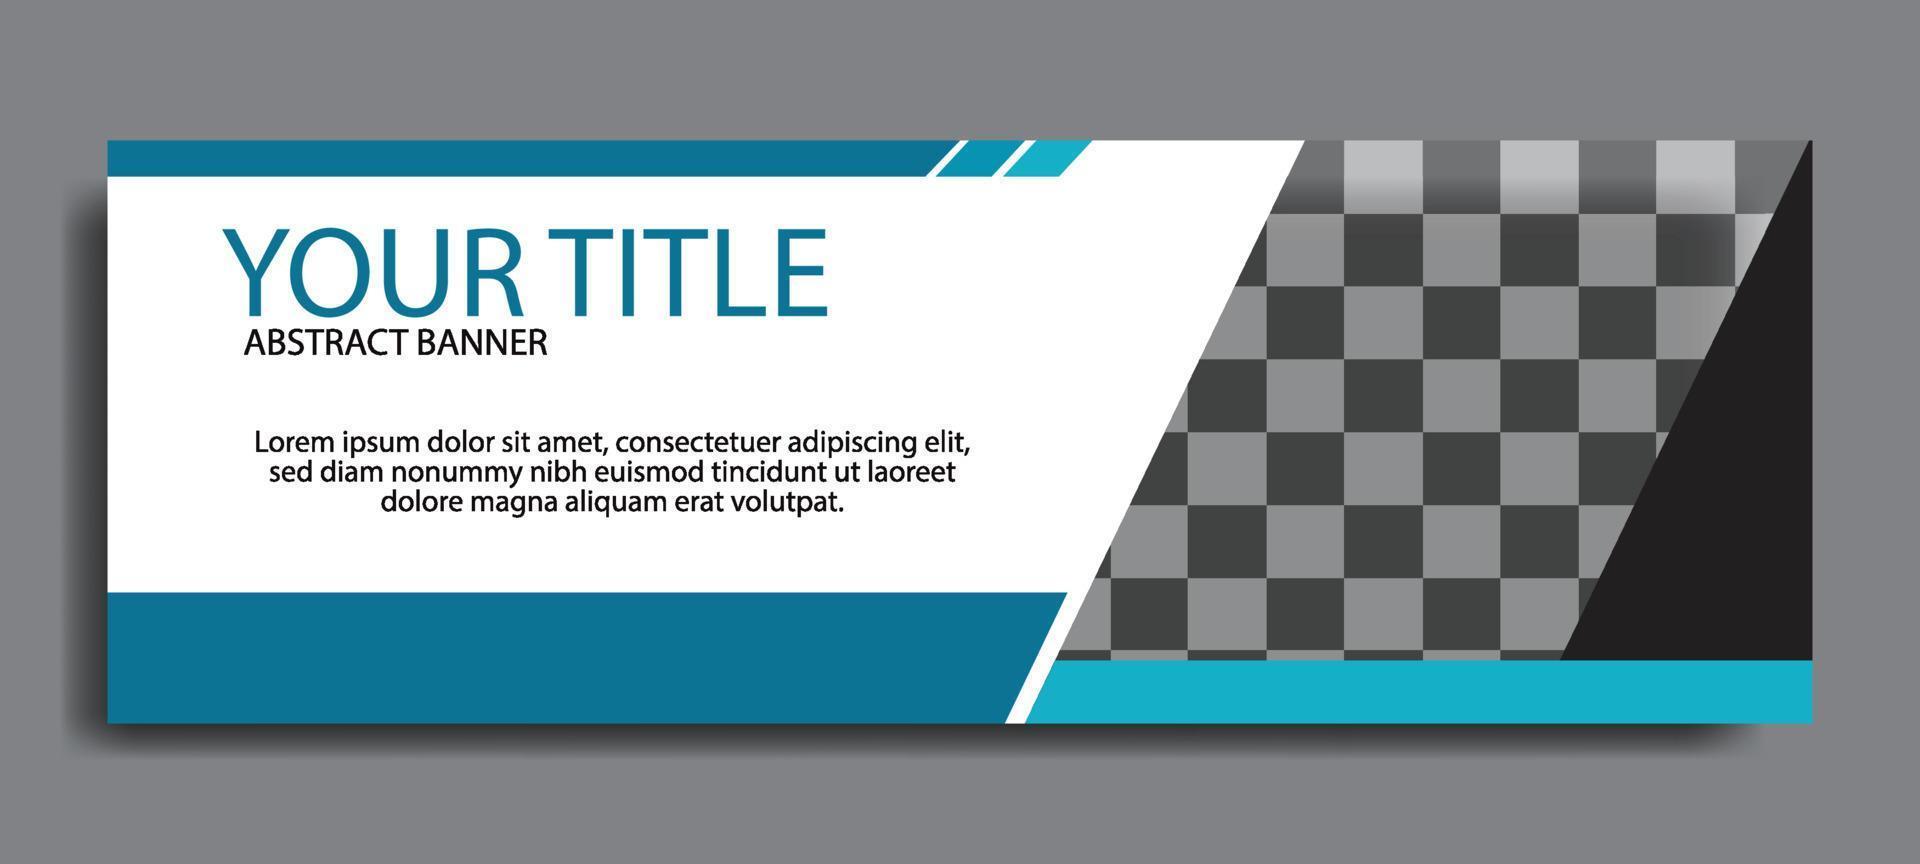 Standard size elegant blue web banners for sale. background for photo layout. Design template vector